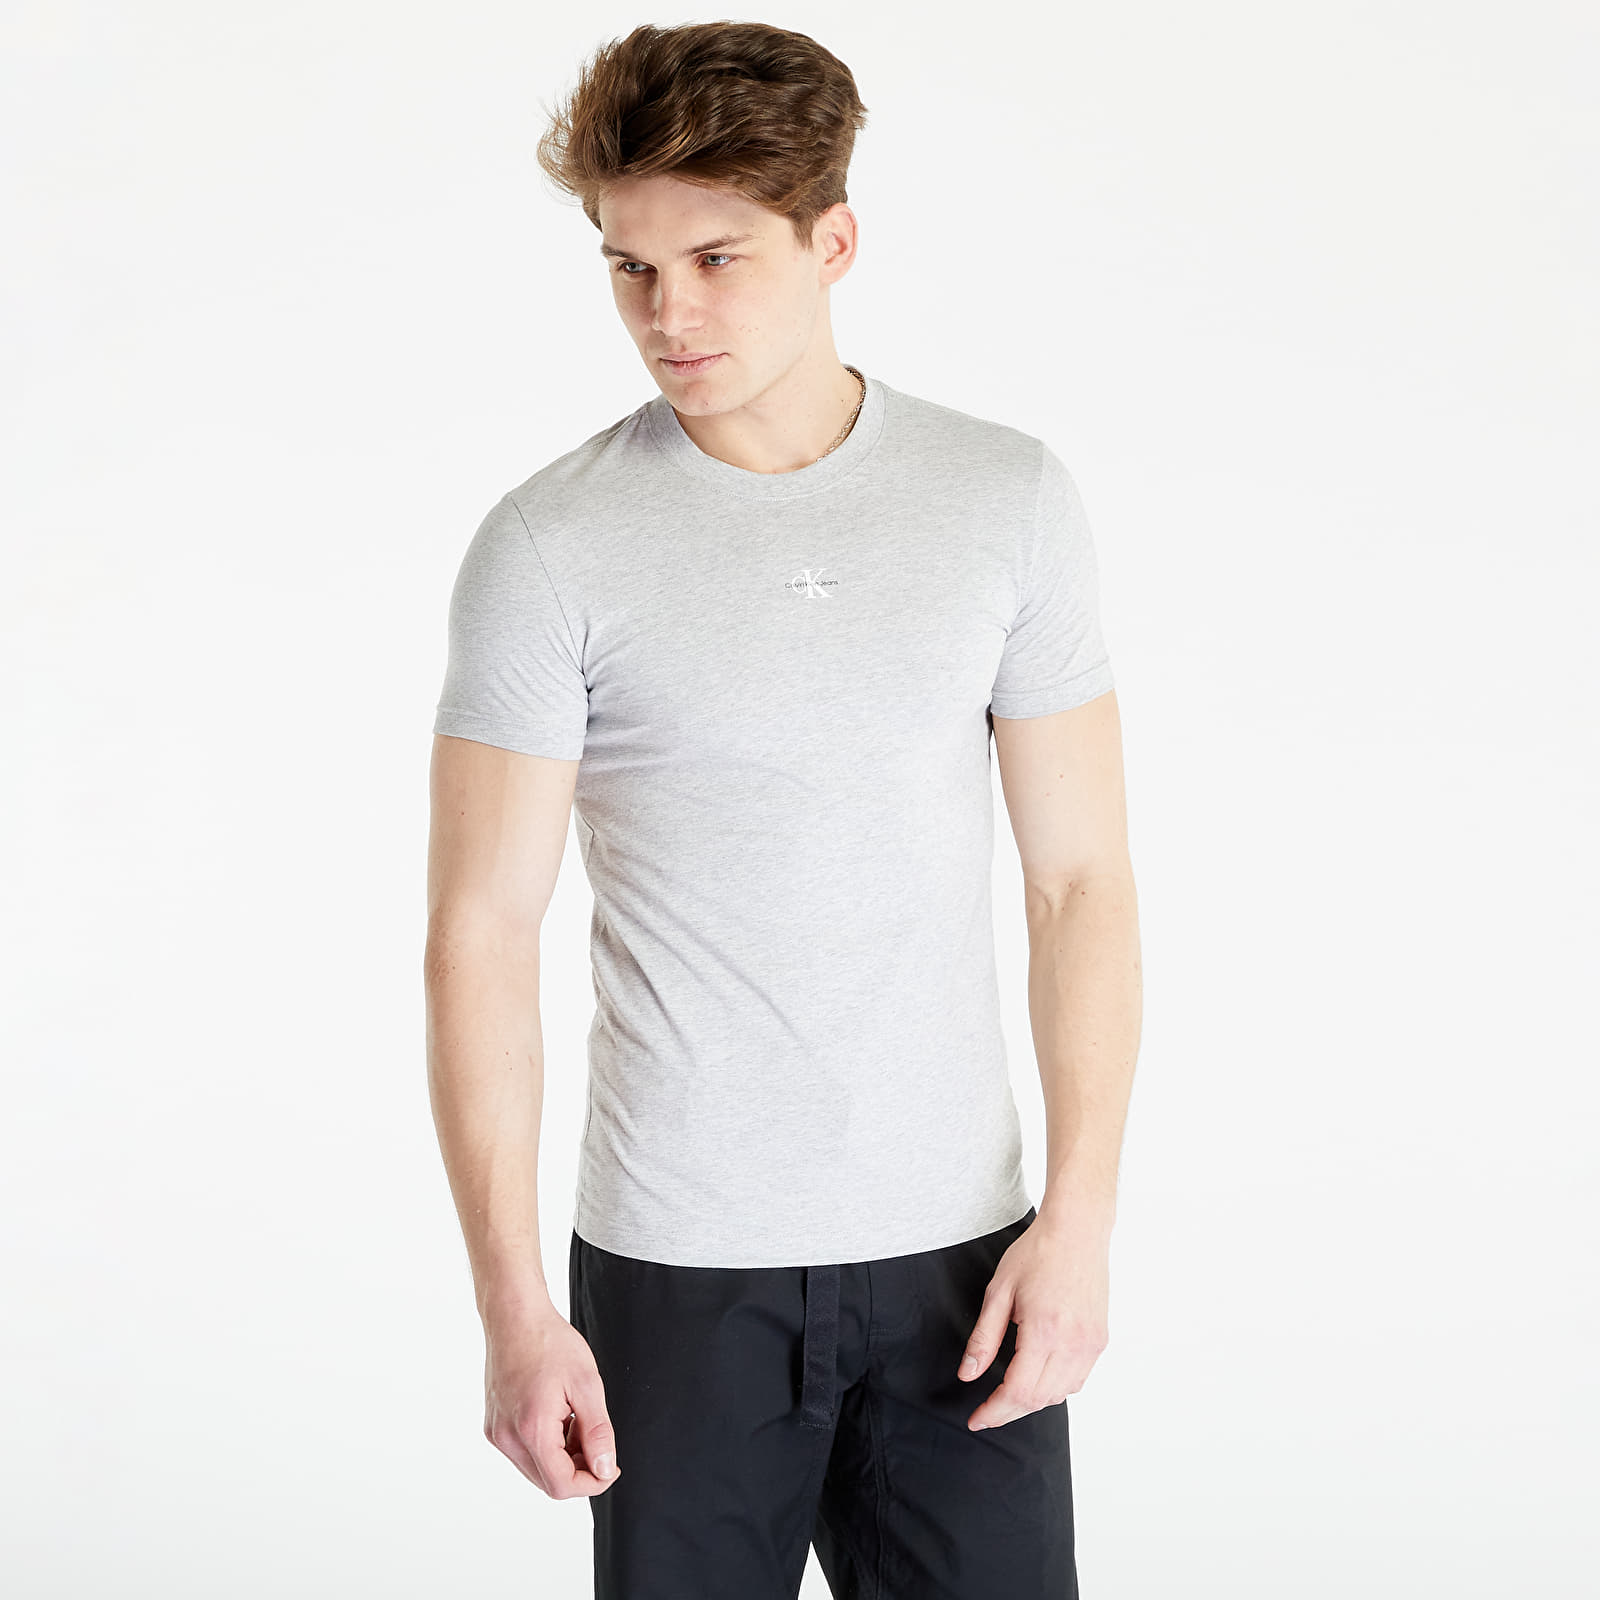 Micro | Queens CALVIN JEANS Monologo S/S Light Grey KLEIN Knit T-shirts Top Tee Heather